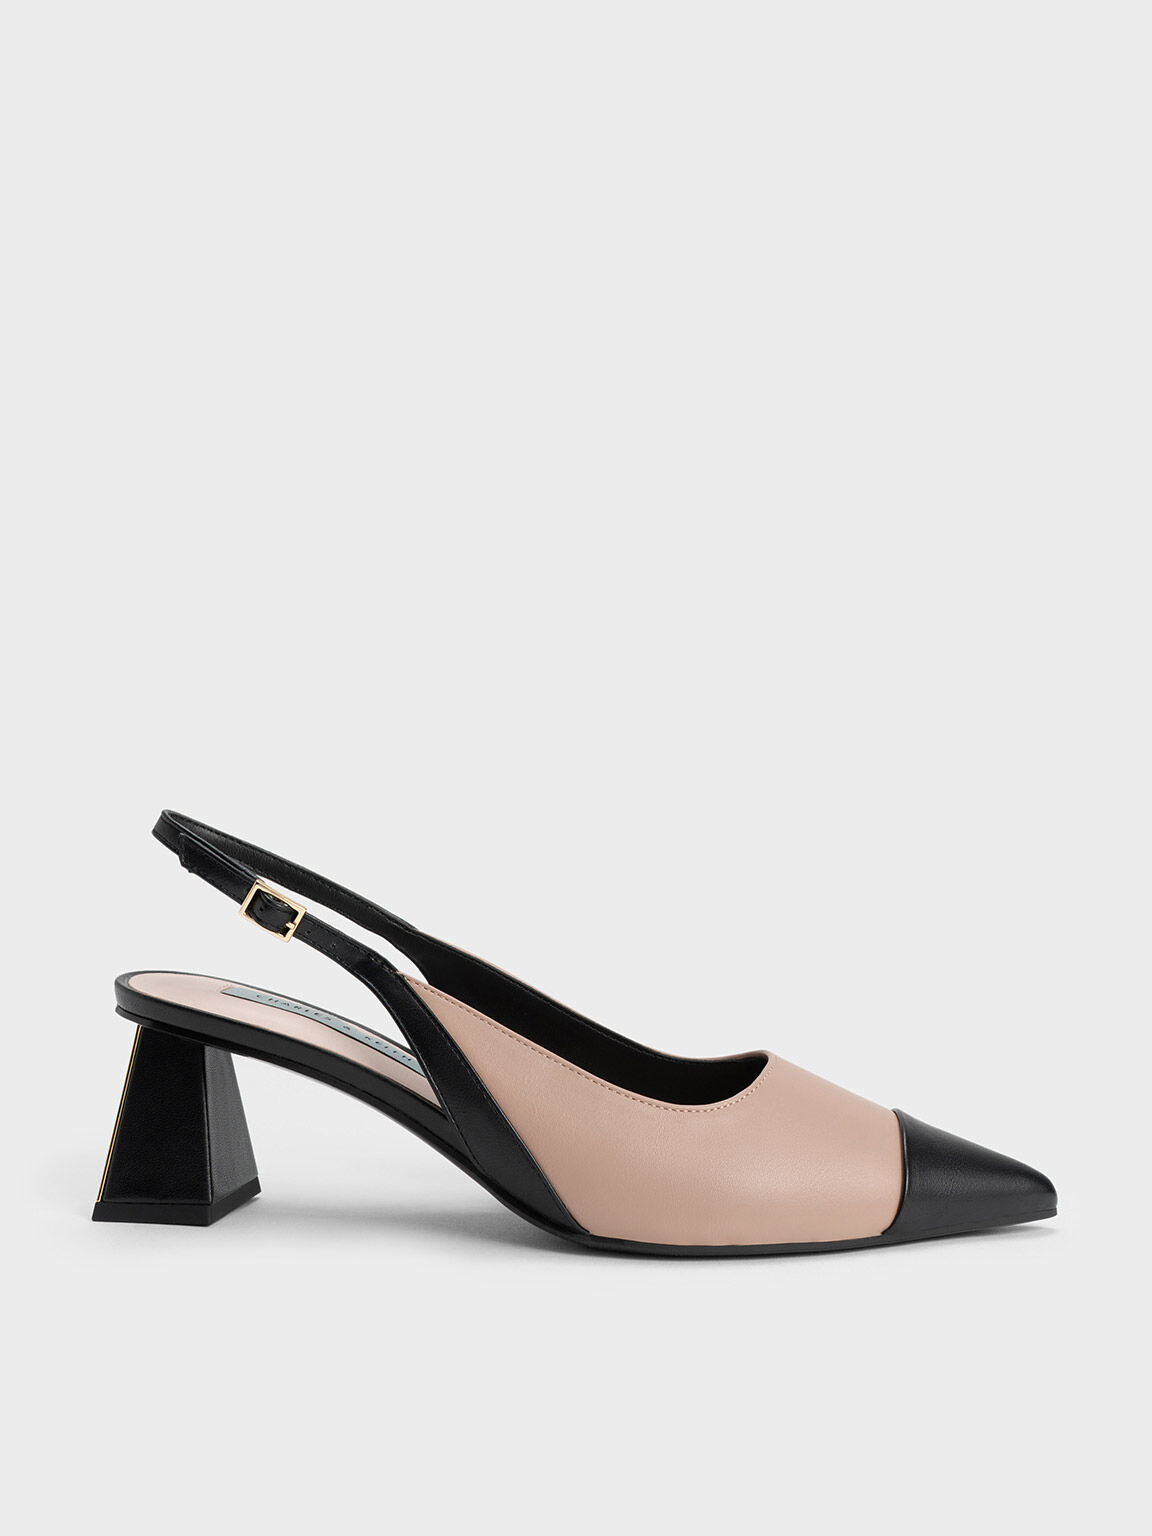 Calla Leather Block Heels,two-tone Pumps,beige With Black Shoes,pointed Toe  Slingback,closed Toe Slingback,black Toe Shoes,women Shoes -  Israel